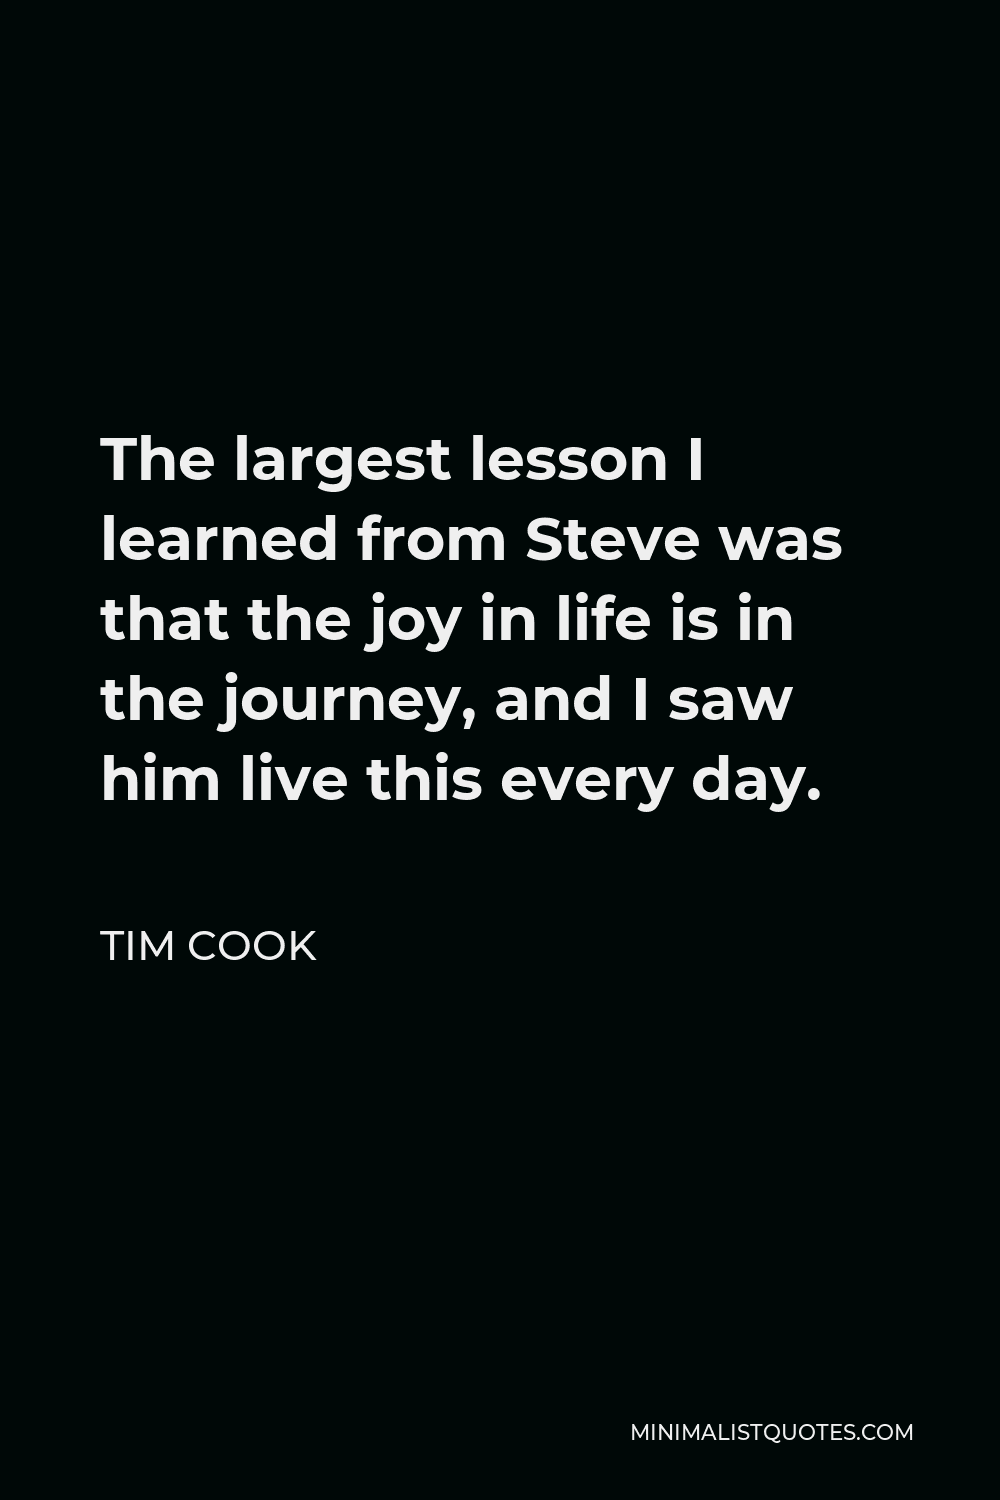 Tim Cook Quote - The largest lesson I learned from Steve was that the joy in life is in the journey, and I saw him live this every day.